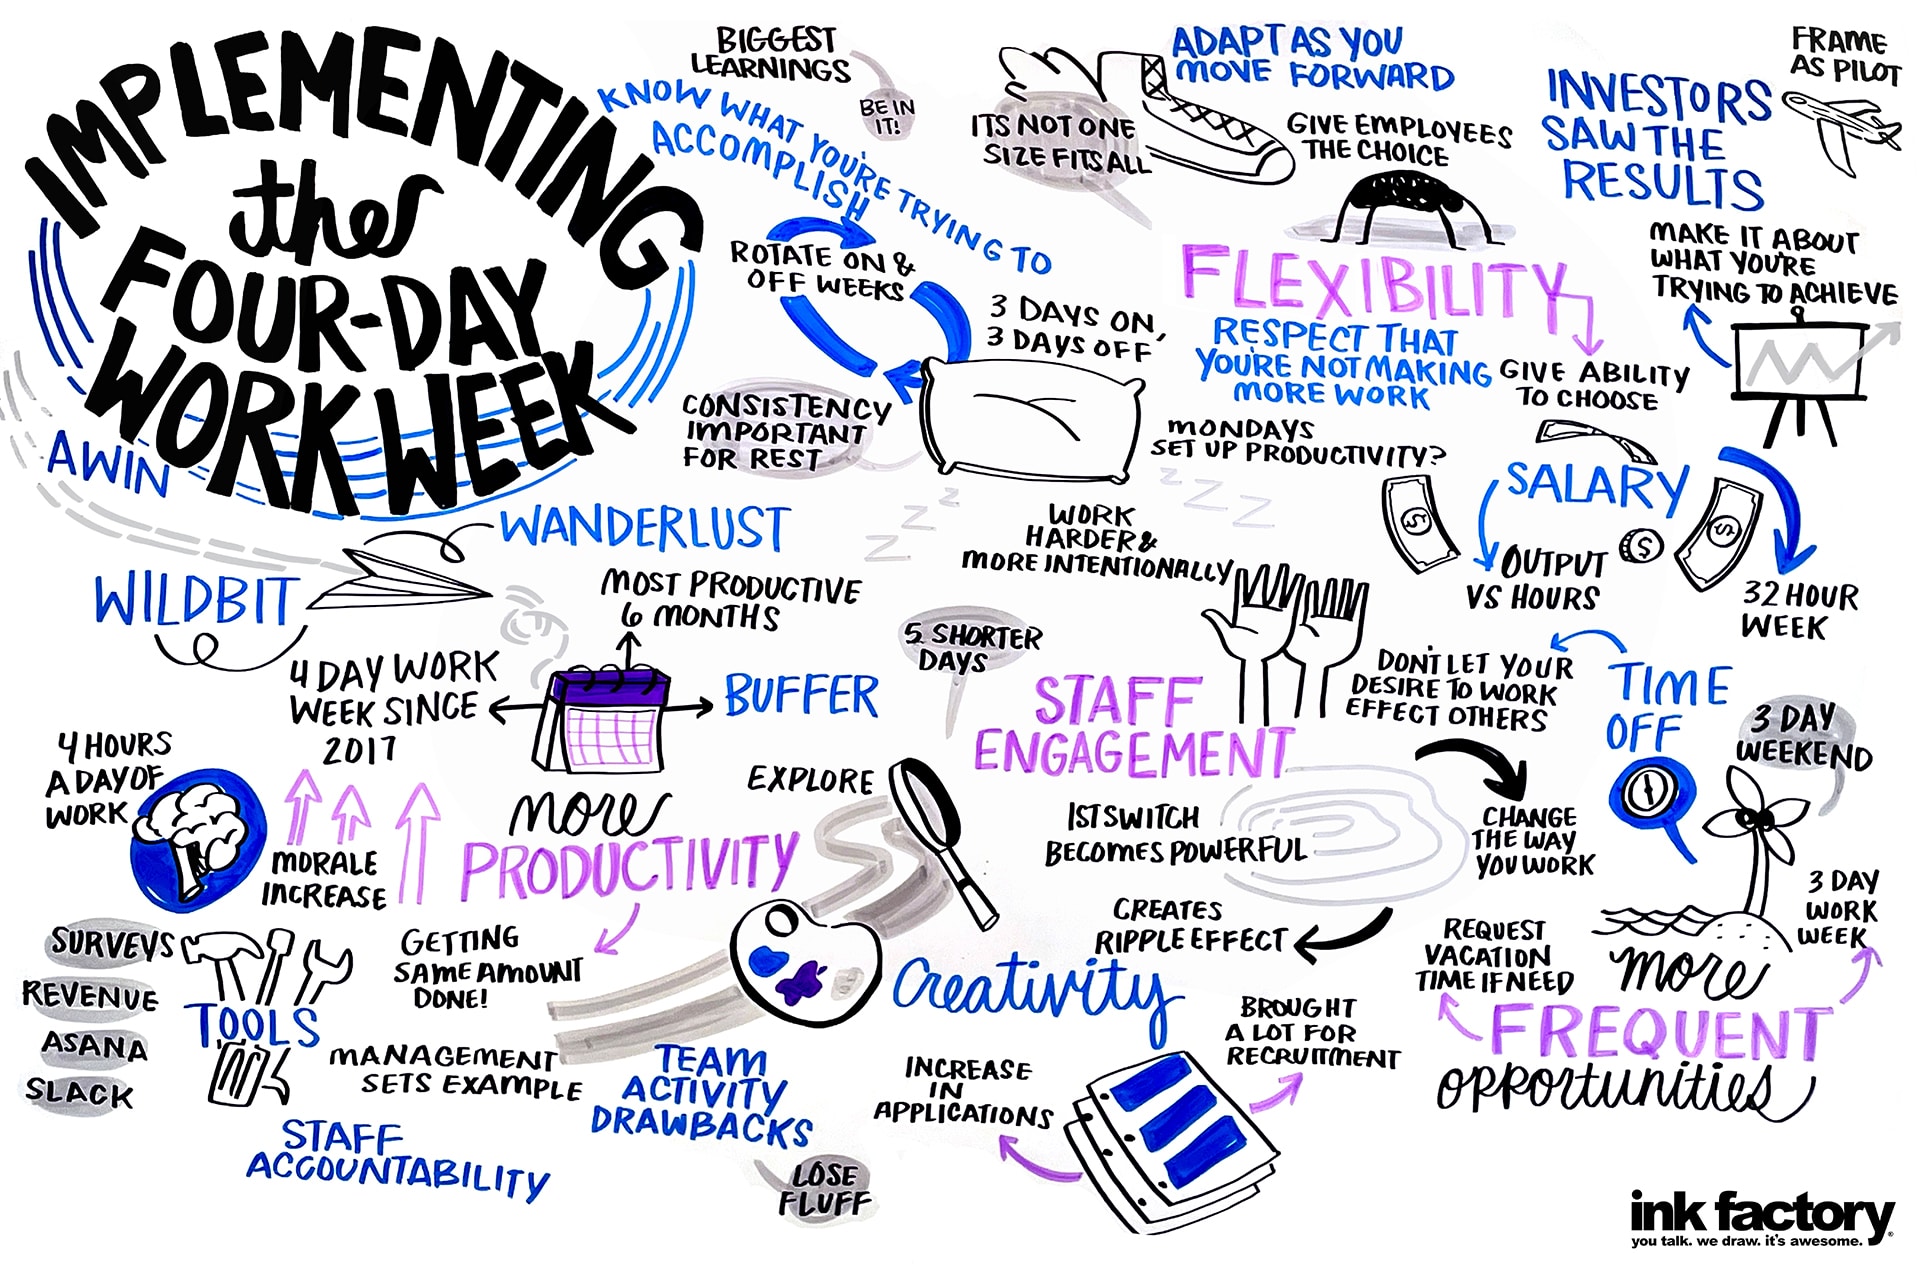 Visual notes titled: Implementing the Four-Day Work Week"